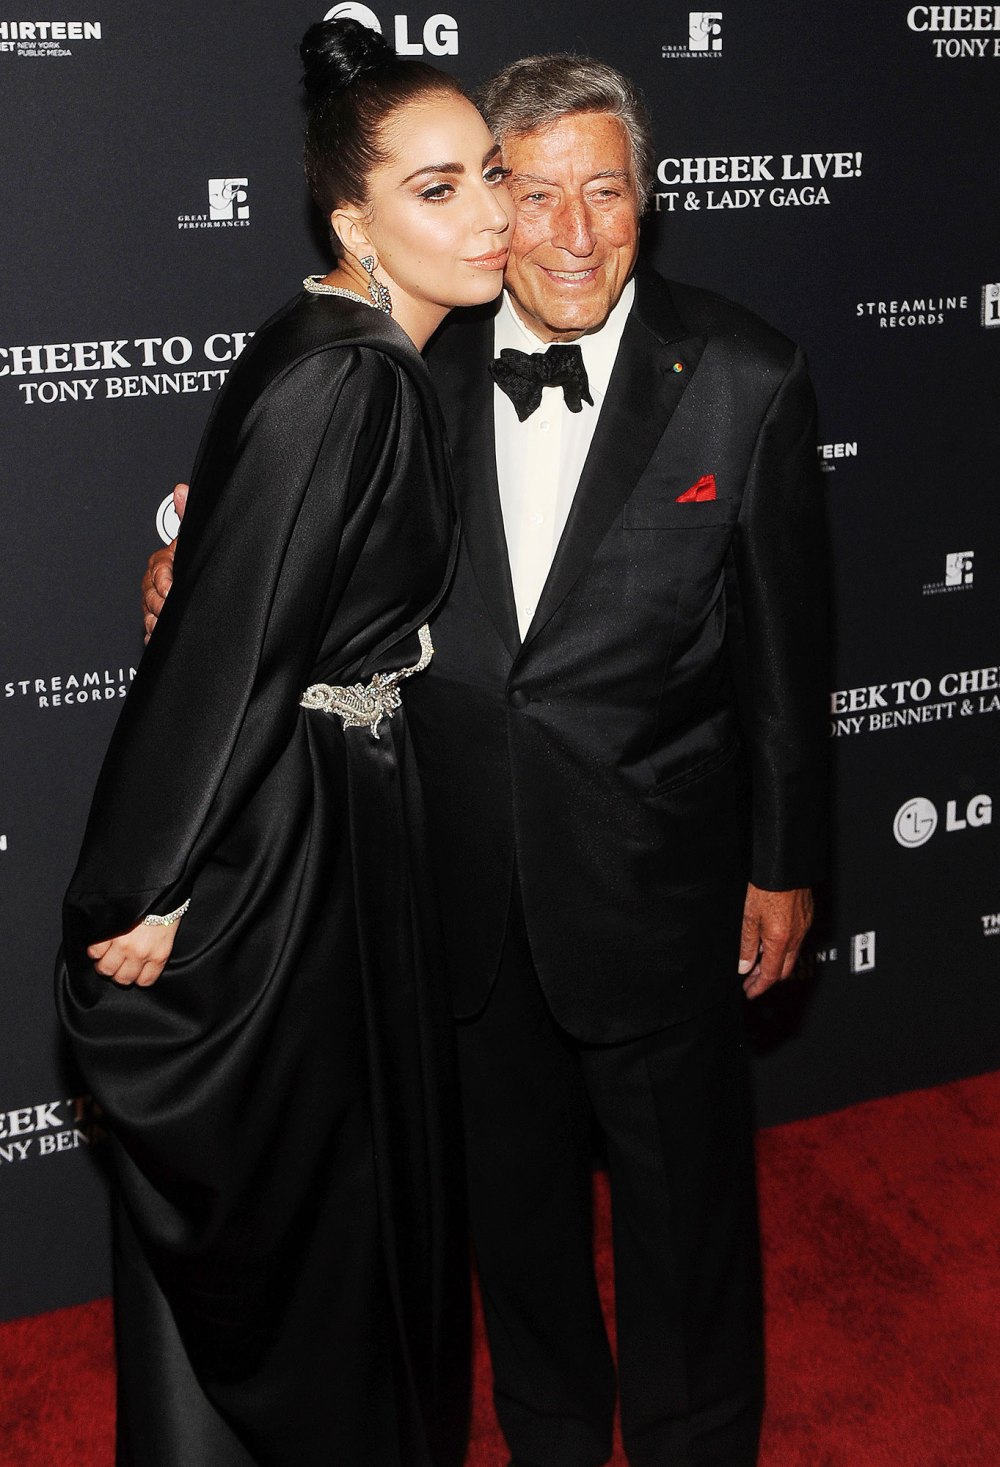 Lady Gaga Delayed Having Kids Because of Tony Bennett, Says He Saved Her Life